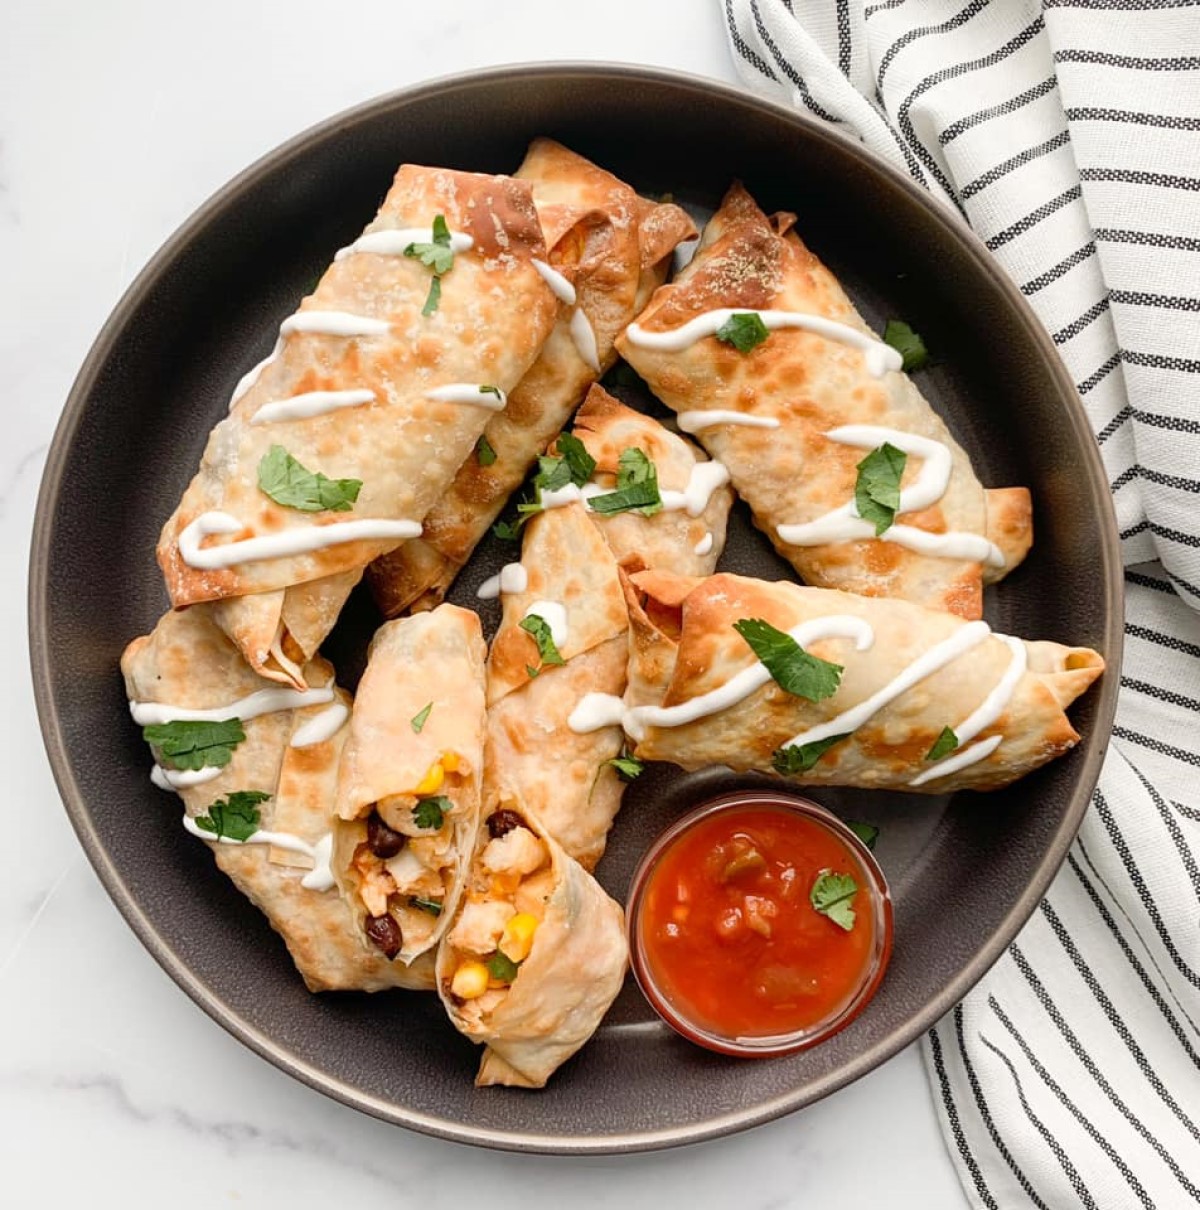 https://keepingonpoint.com/wp-content/uploads/2021/03/Southwest-Chicken-Egg-Rolls-Air-Fryer-or-Oven-Baked-Weight-Watchers-Recipes-WW-Recipes-Healthy-Recipes.jpg